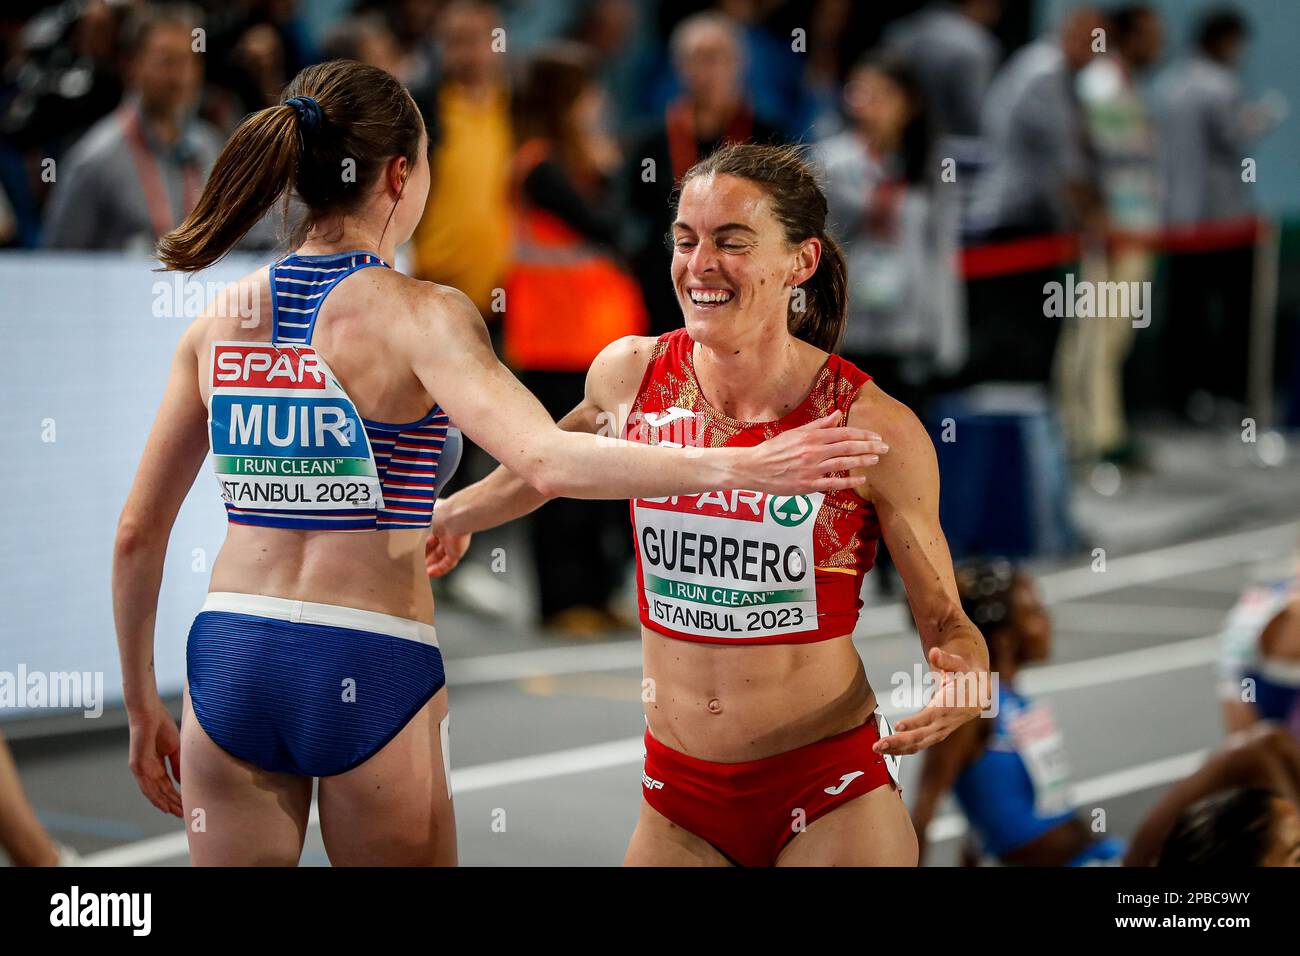 ISTANBUL, TURKEY - MARCH 04: Esther Guerrero of Spain reacts in 1500m Women  Final race during the European Athletics Indoor Championships - Day 2 on  March 4, 2023 in Istanbul, Turkey. (Photo